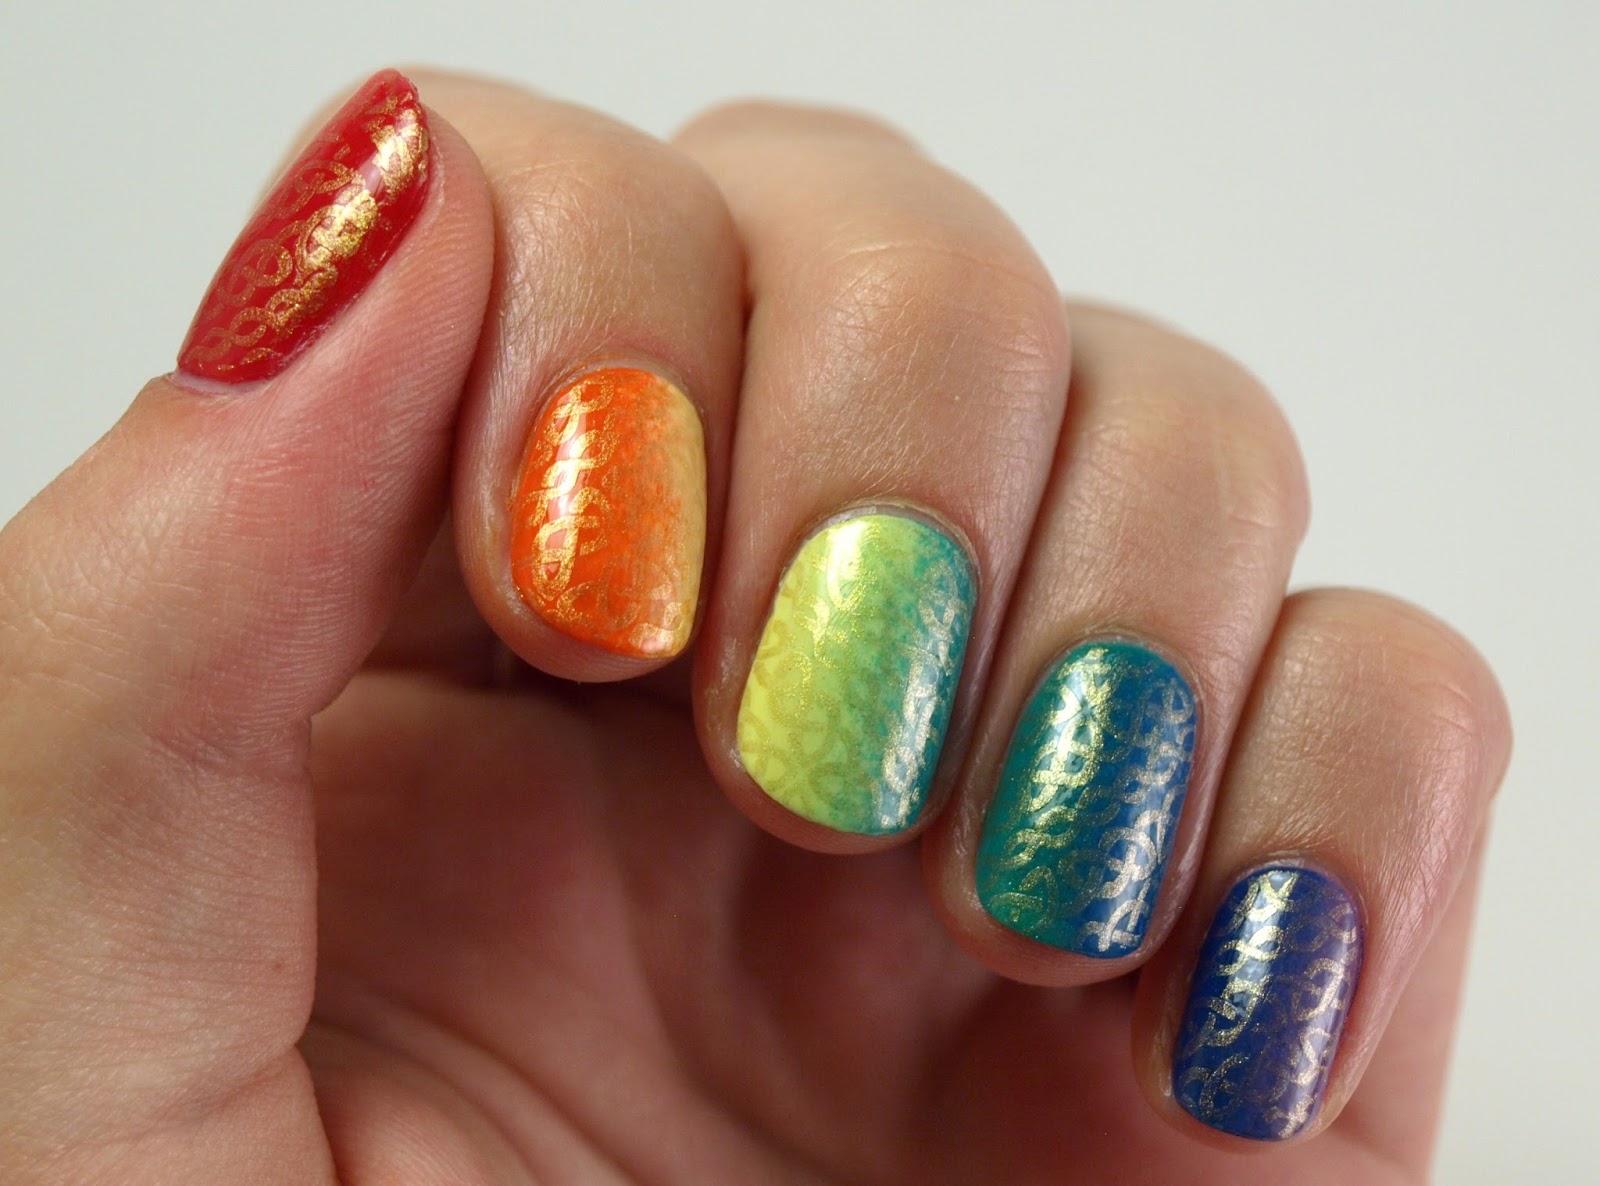 6. Neon Rainbow French Tip Nails - wide 2